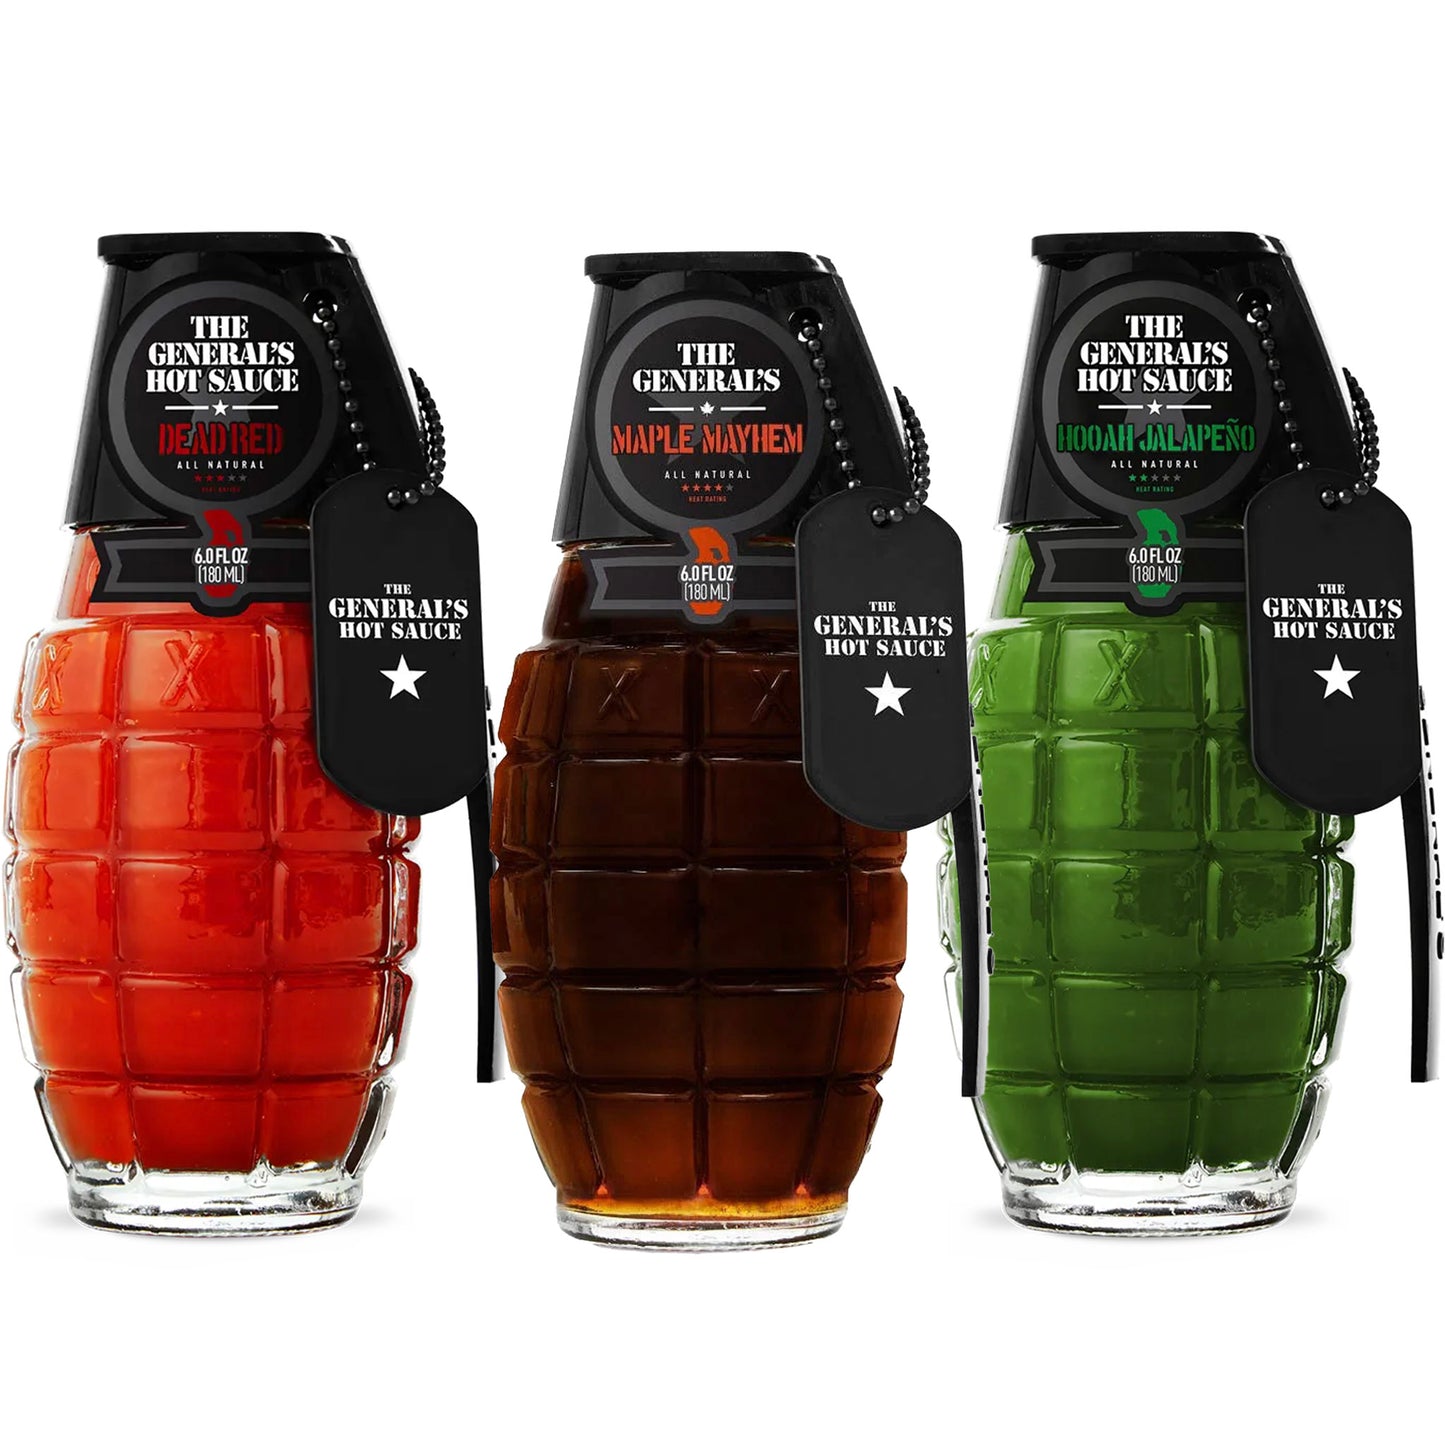 The General's Hot Sauce Christmas Crackers 3-Pack